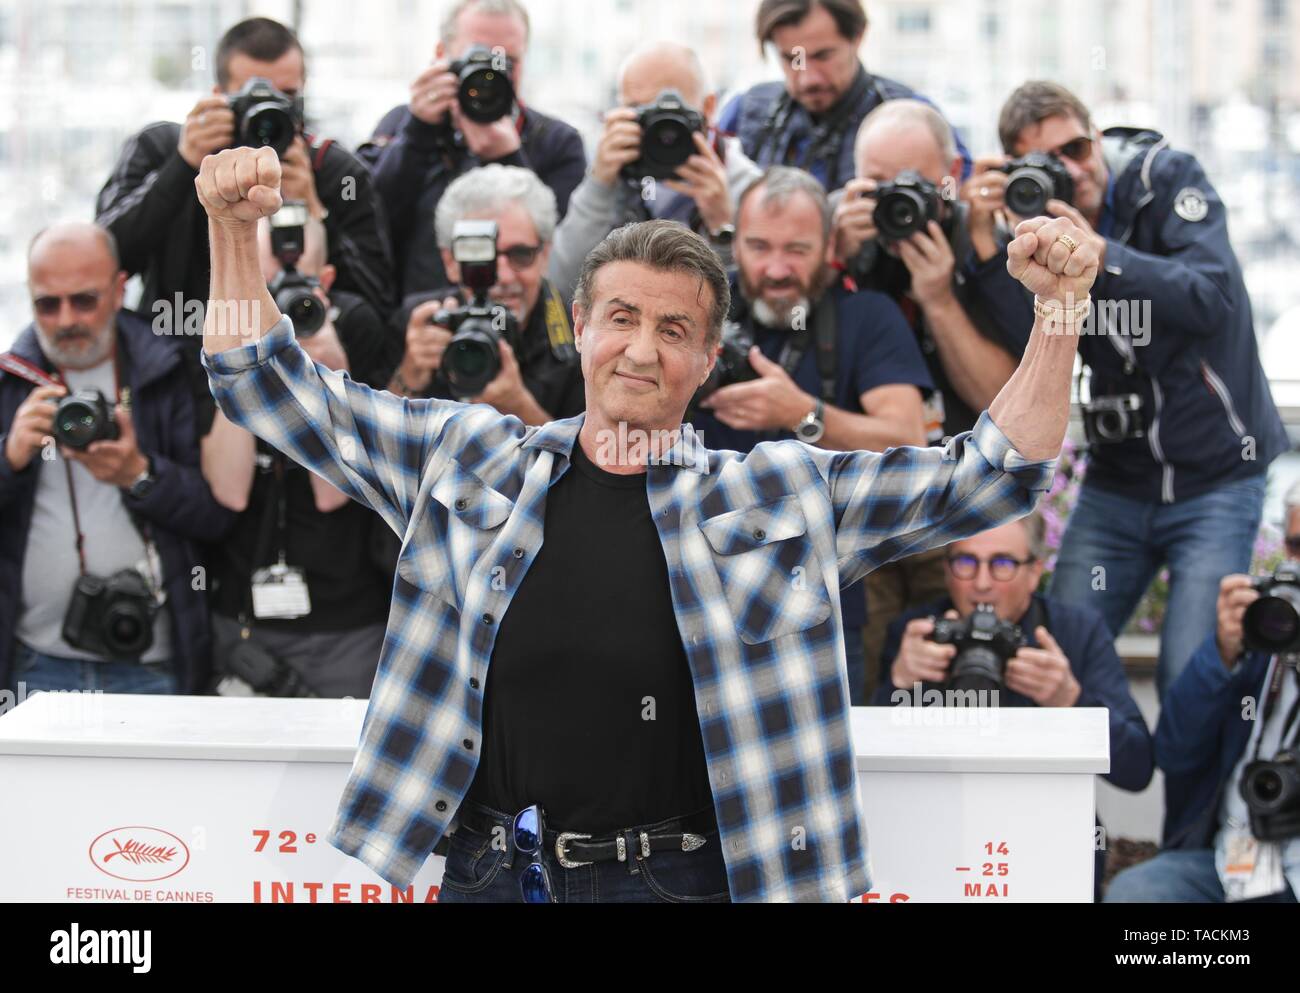 Cannes, France. 24 mai, 2019. Sylvester Stallone,Cannes 2019 Banque D'Images